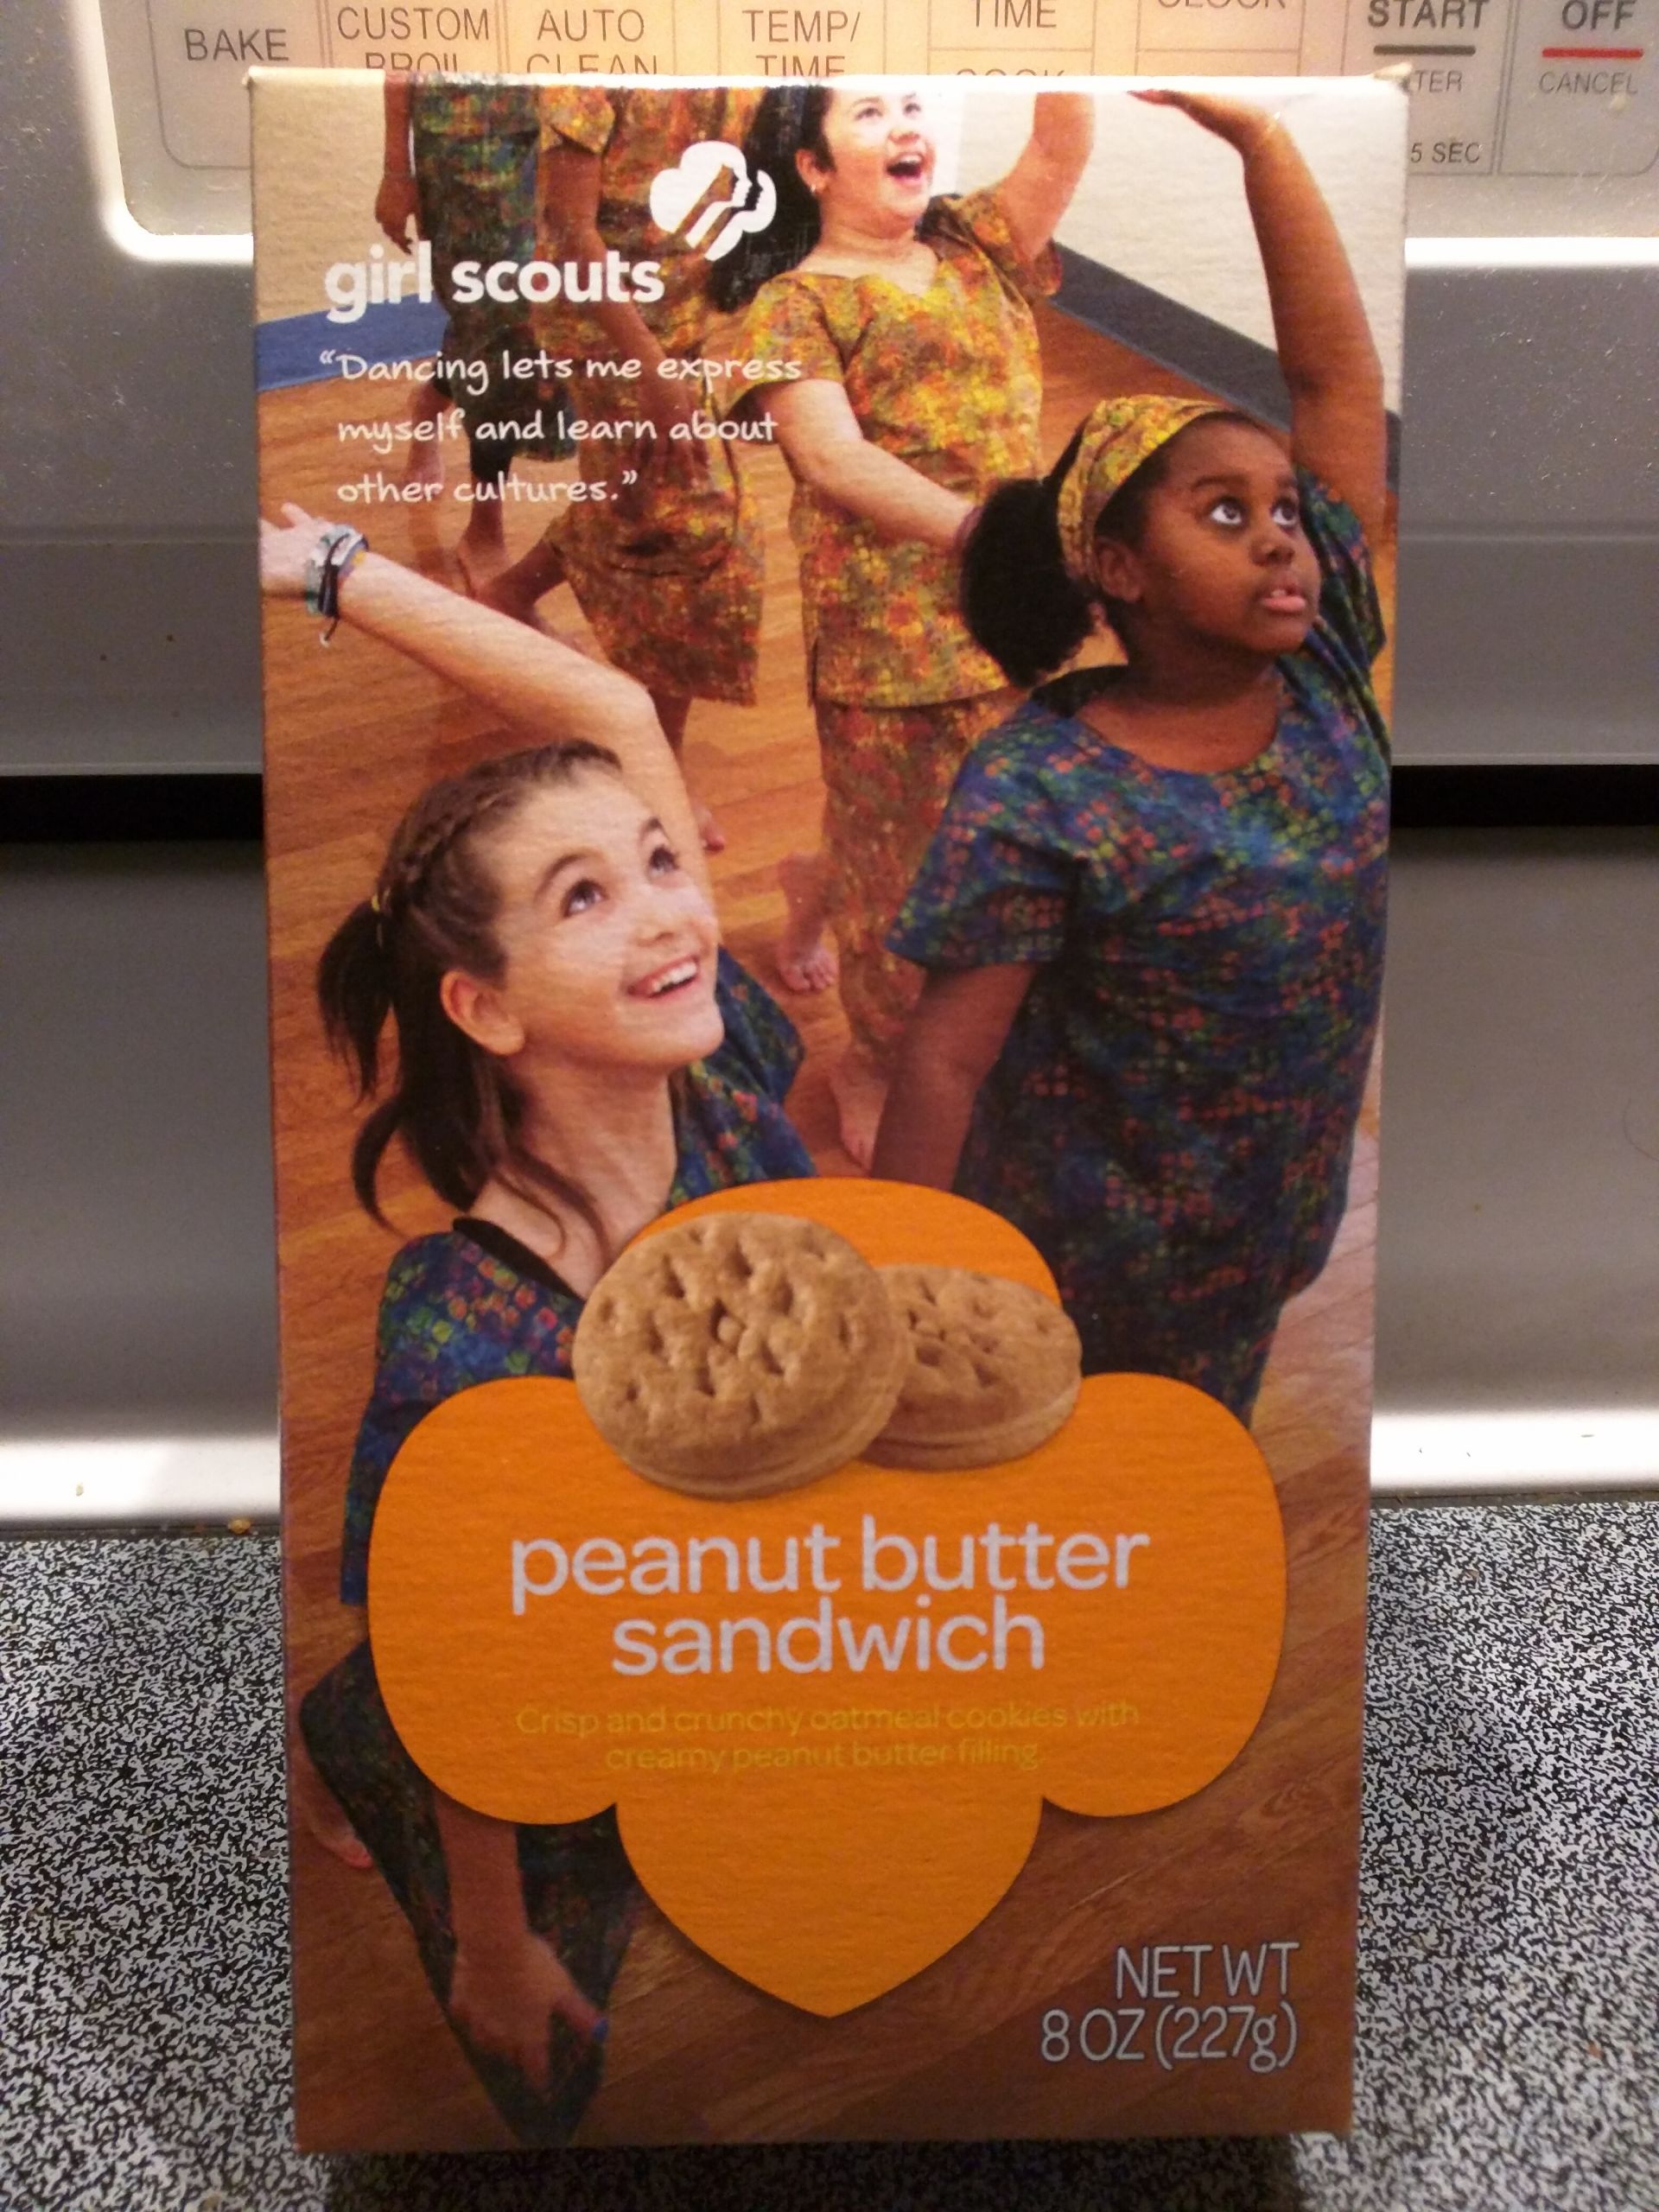 Girl Scout Cookies Peanut Butter
 My favorite Girl Scout Cookies – Travel Finance Food